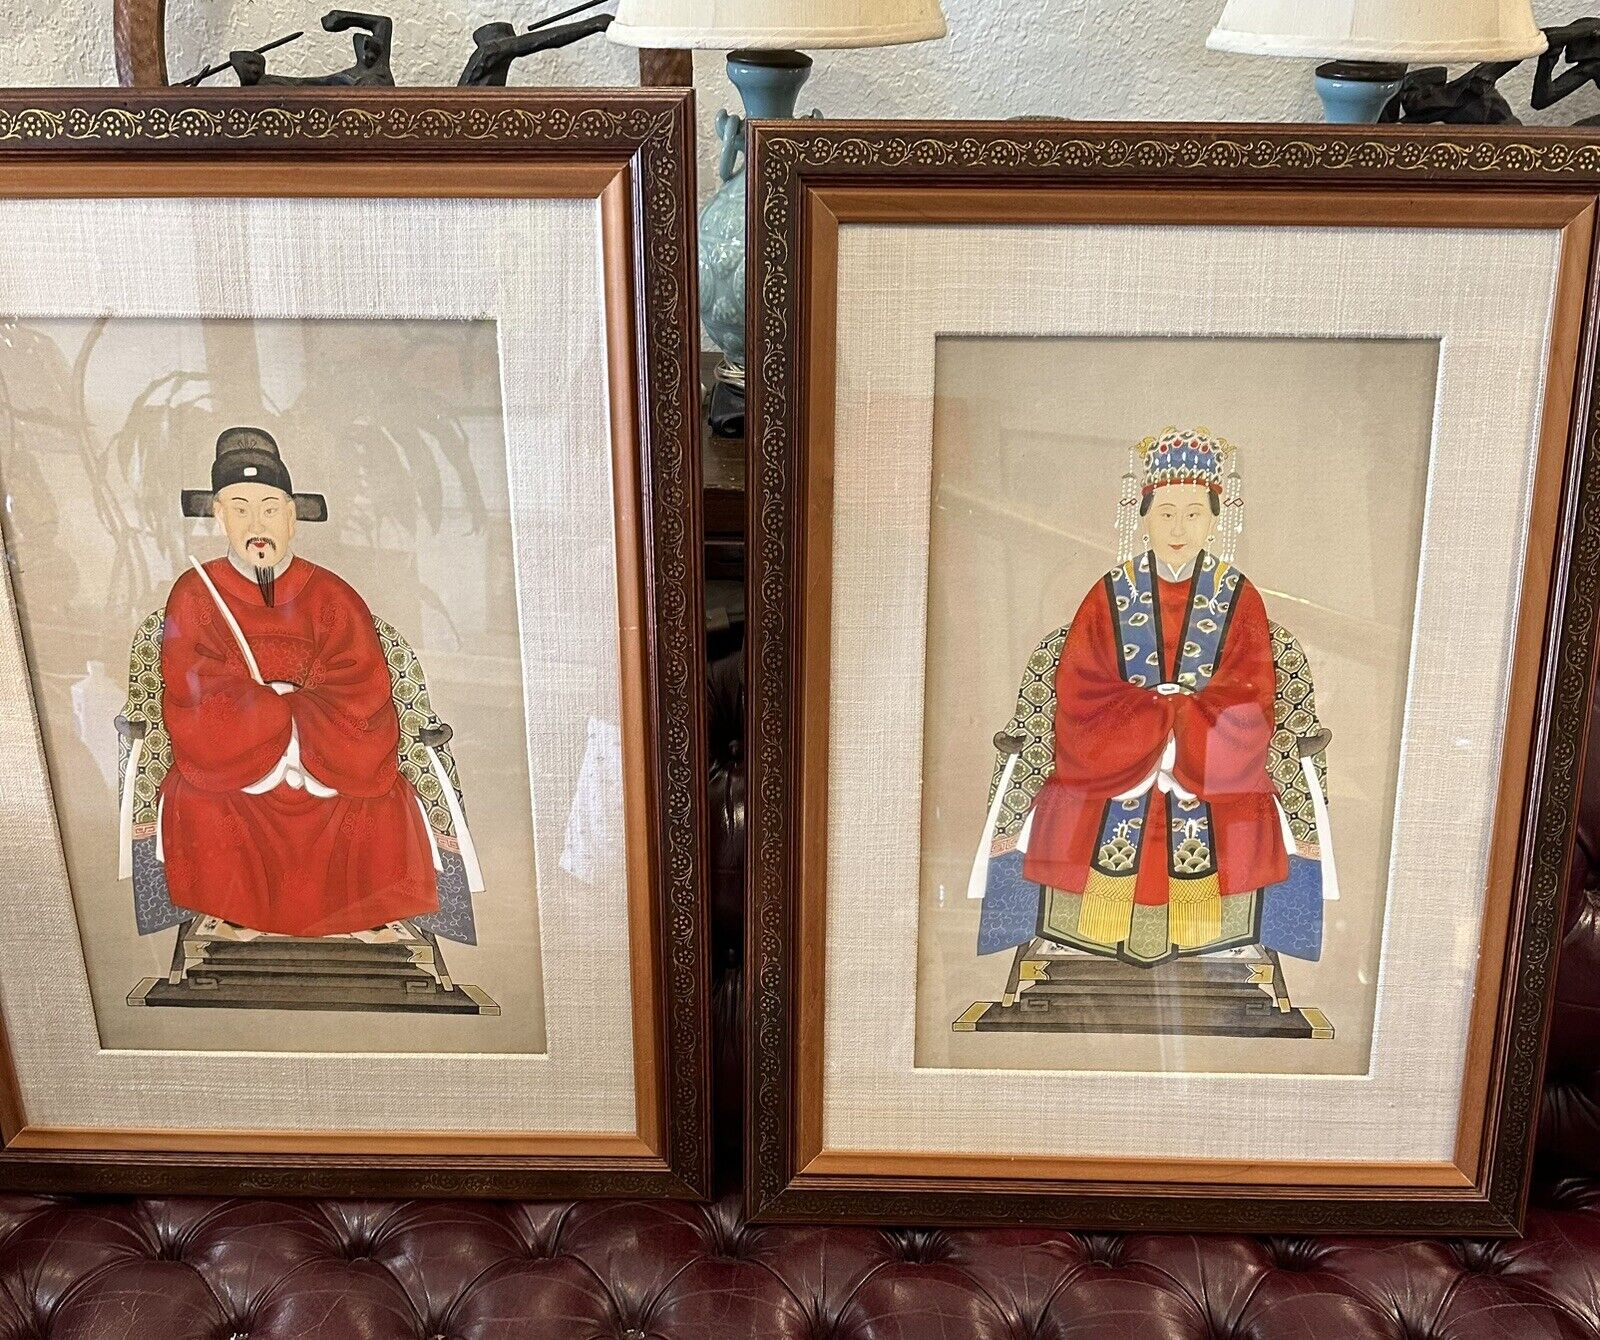 Pair Of Chinese Ancestral Paintings 31”x 23” Framed